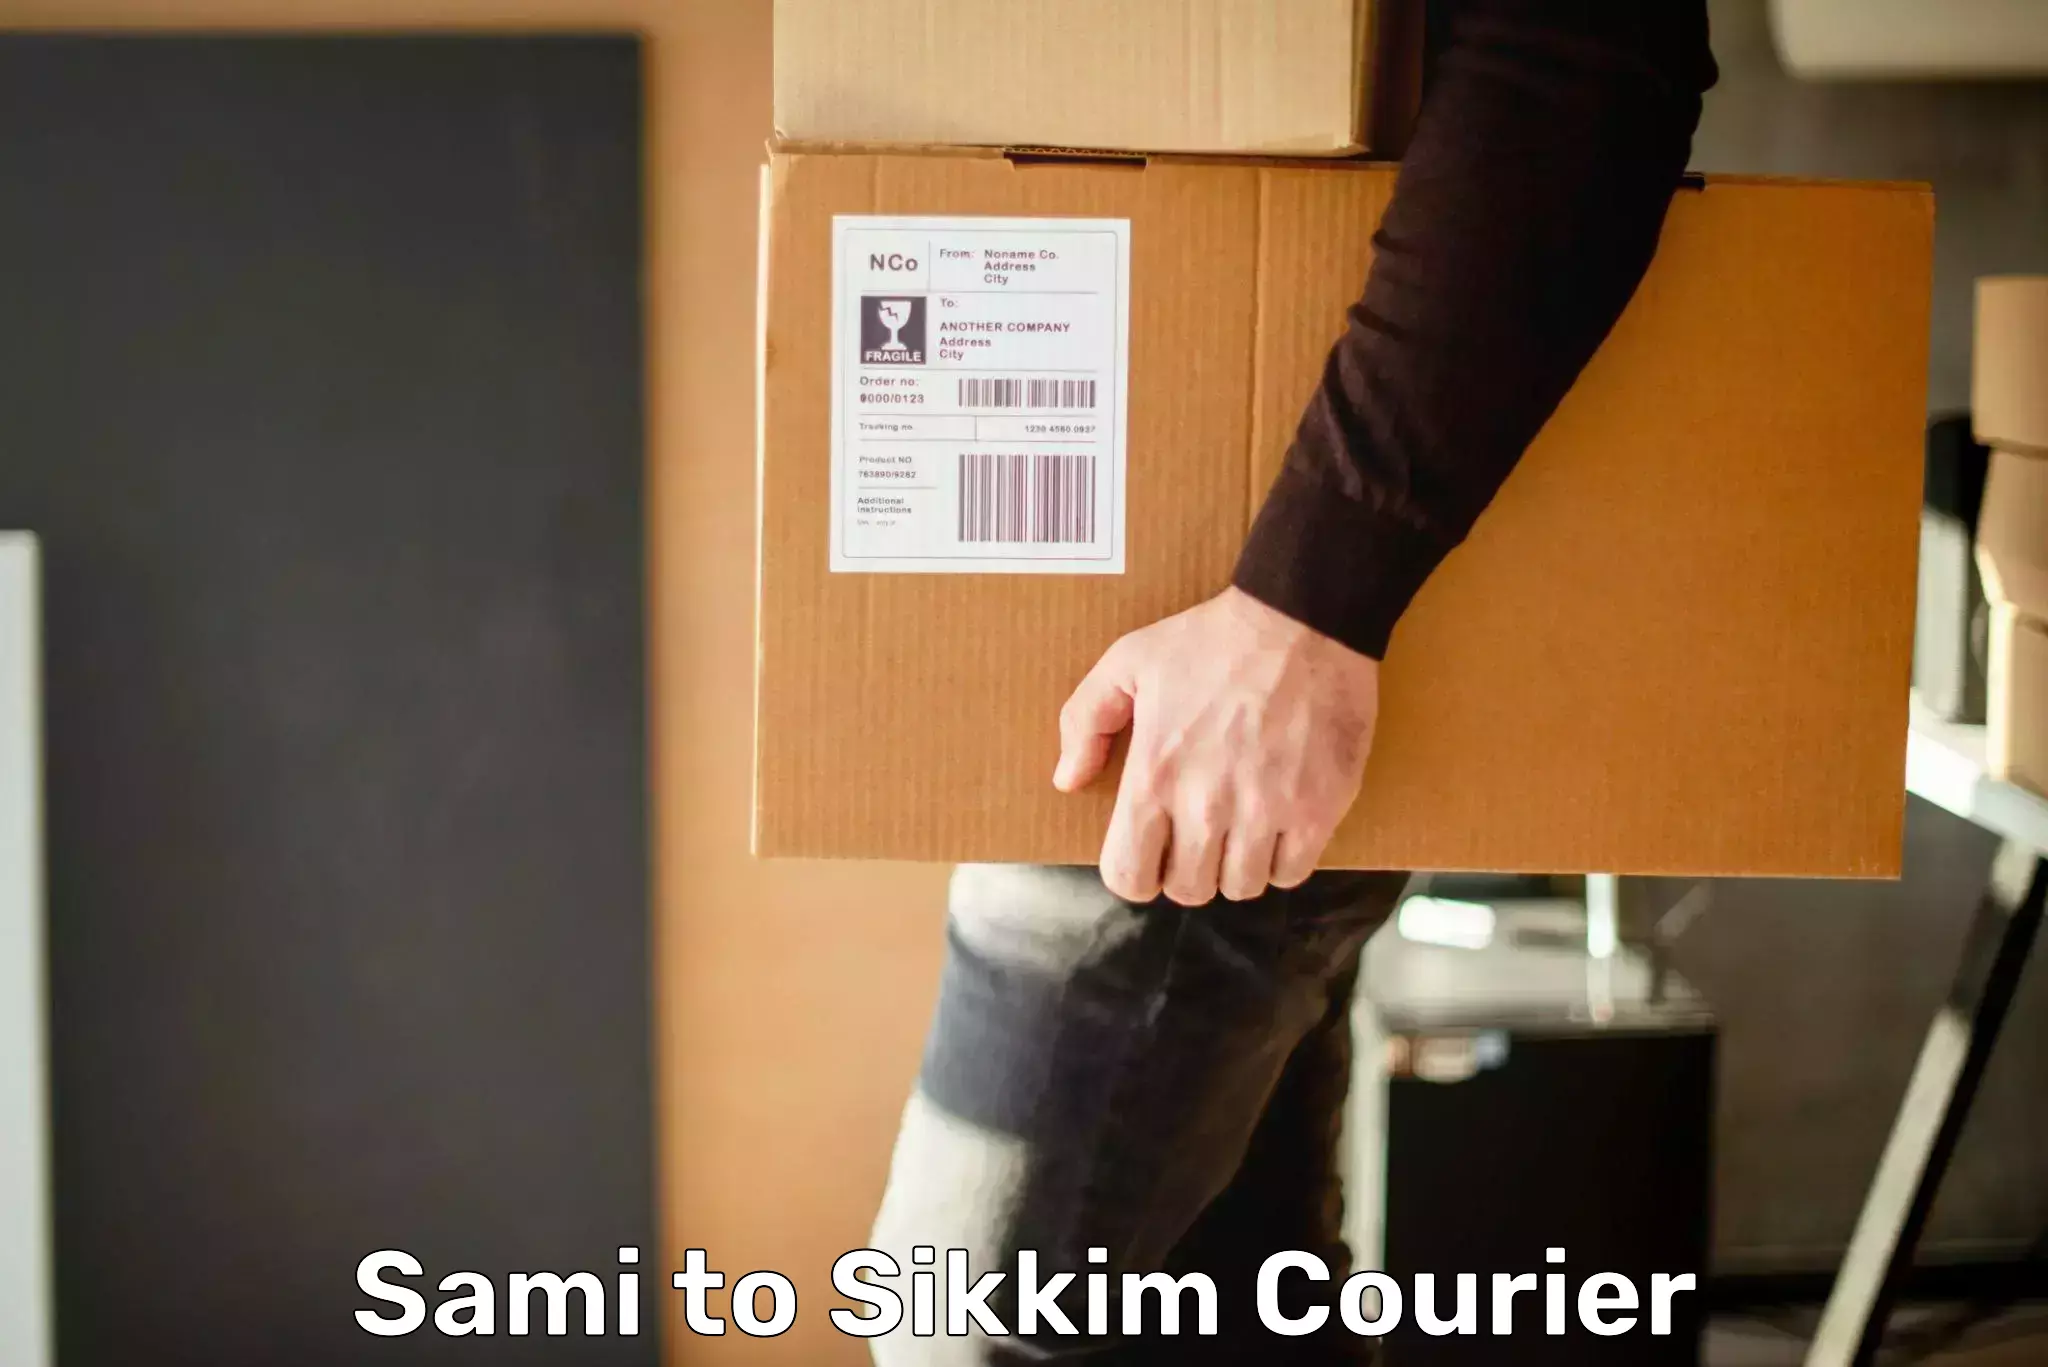 Global shipping networks Sami to East Sikkim